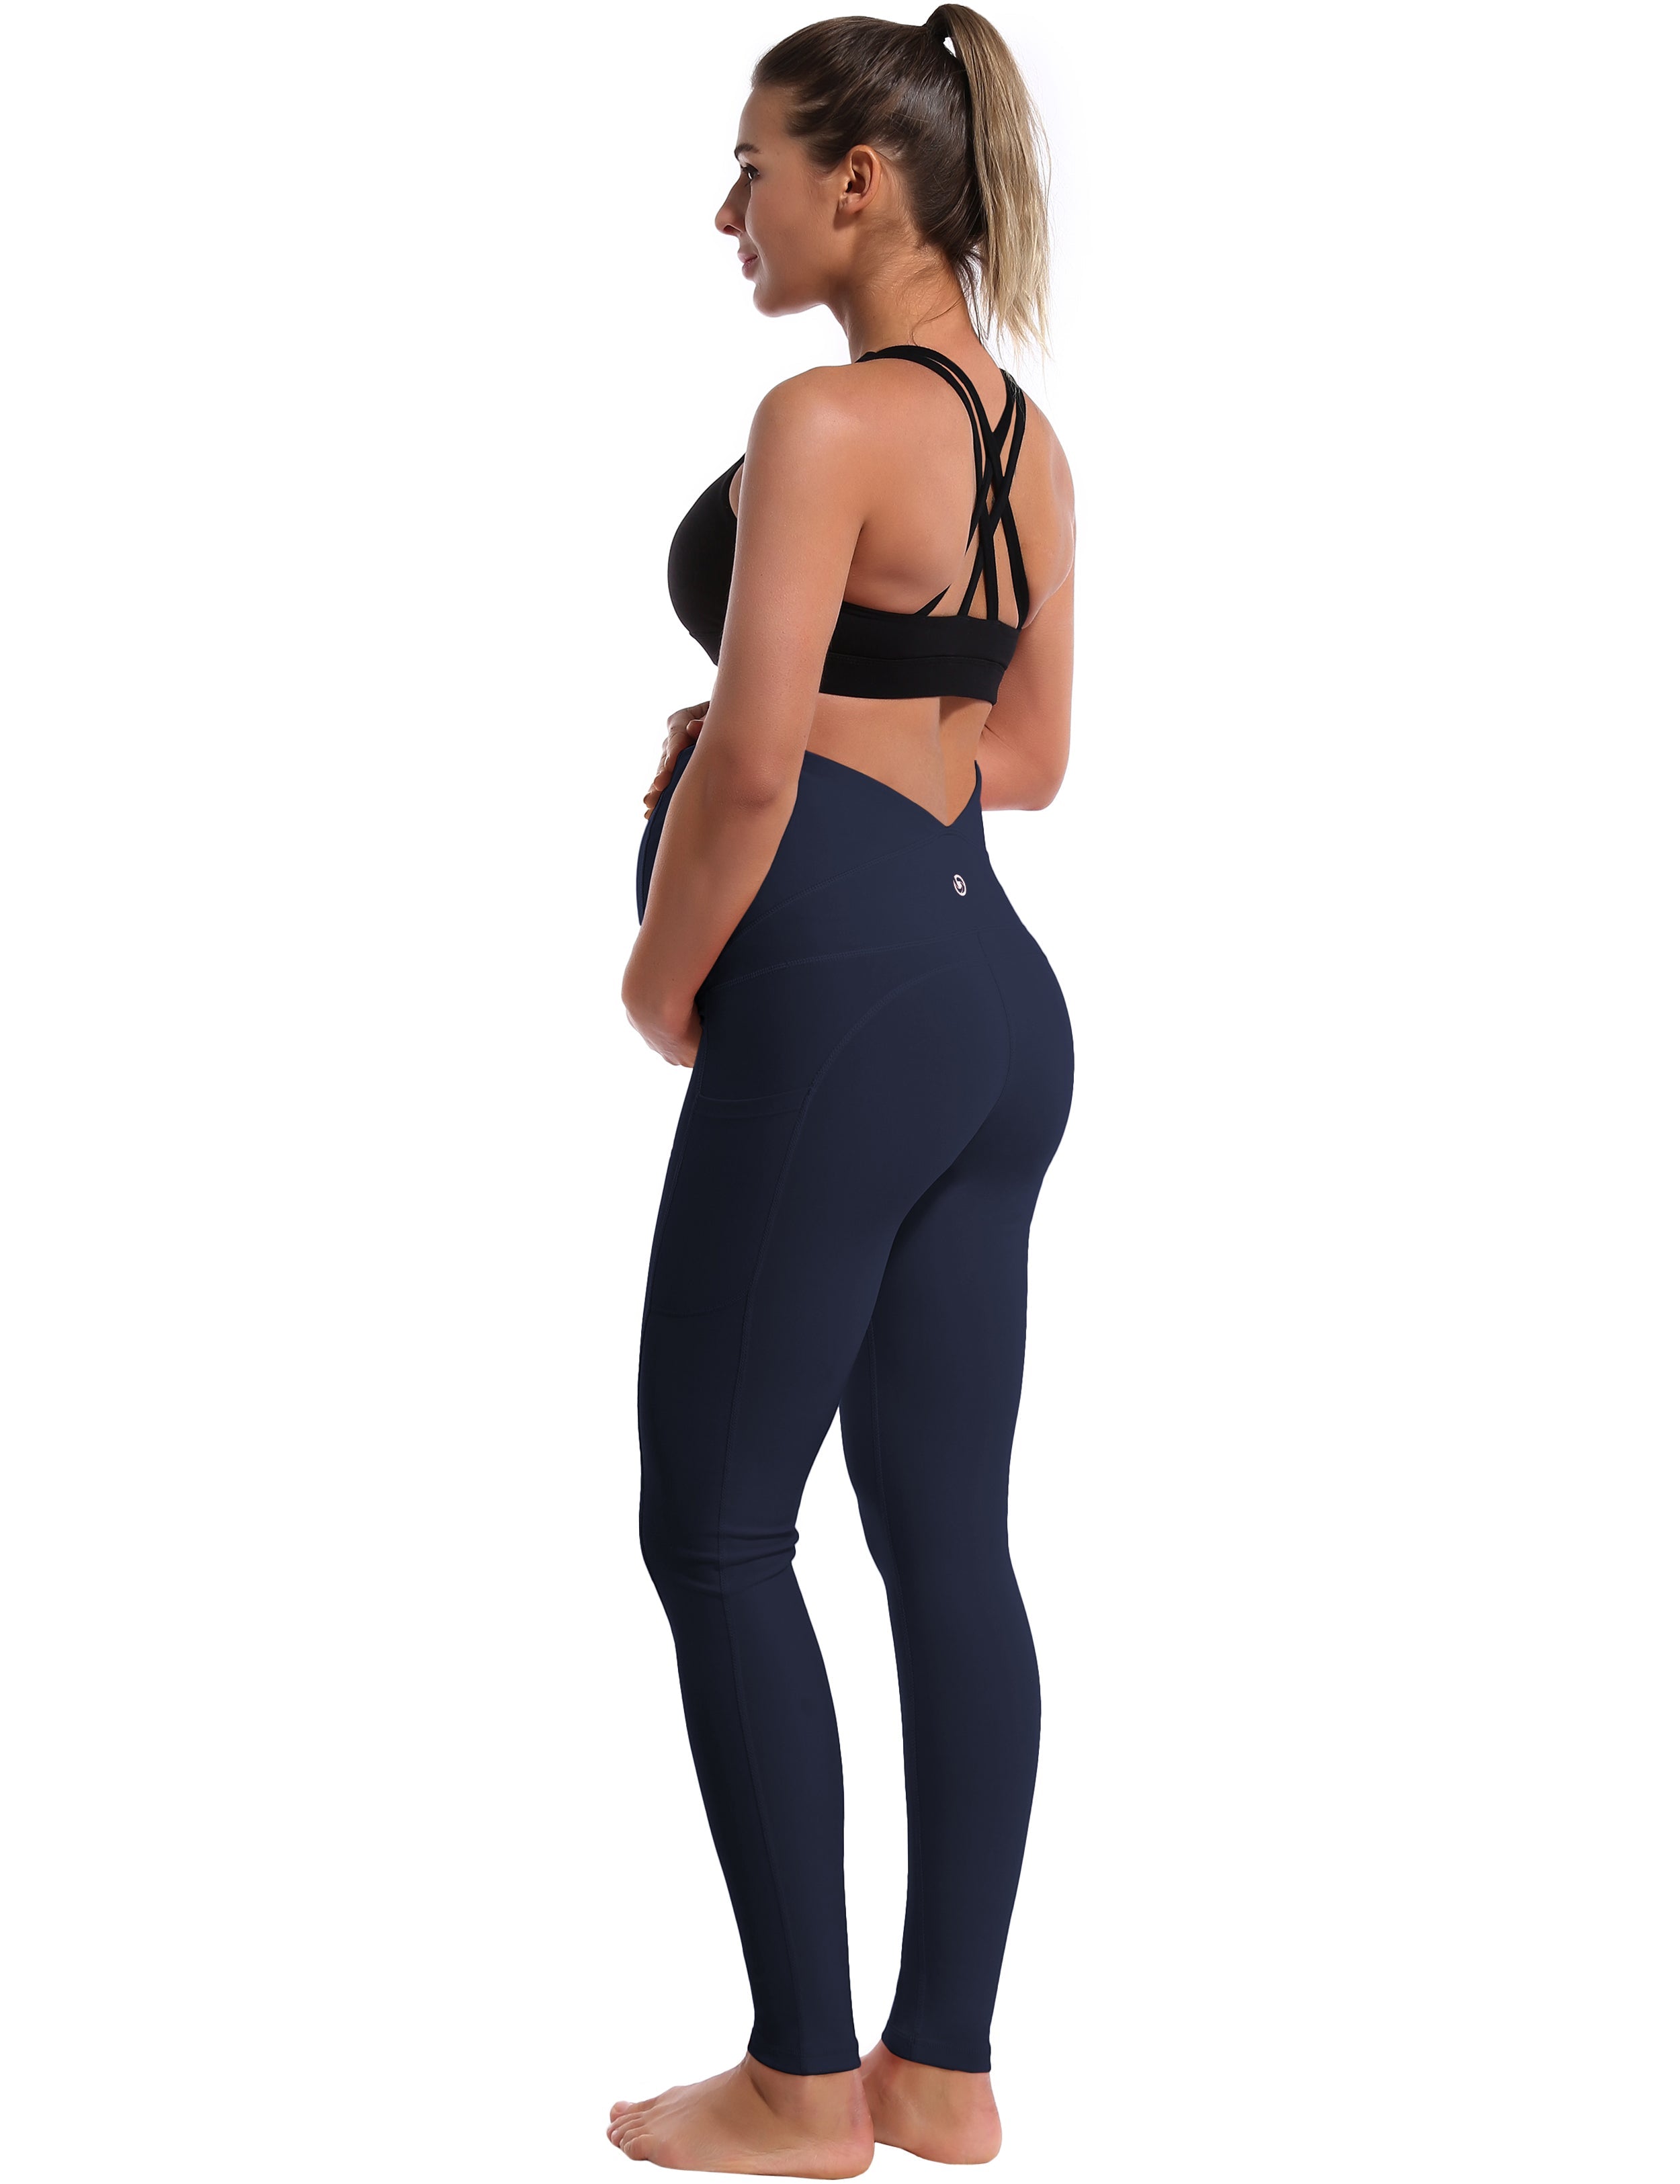 26" Side Pockets Maternity Yoga Pants darknavy 87%Nylon/13%Spandex Softest-ever fabric High elasticity 4-way stretch Fabric doesn't attract lint easily No see-through Moisture-wicking Machine wash